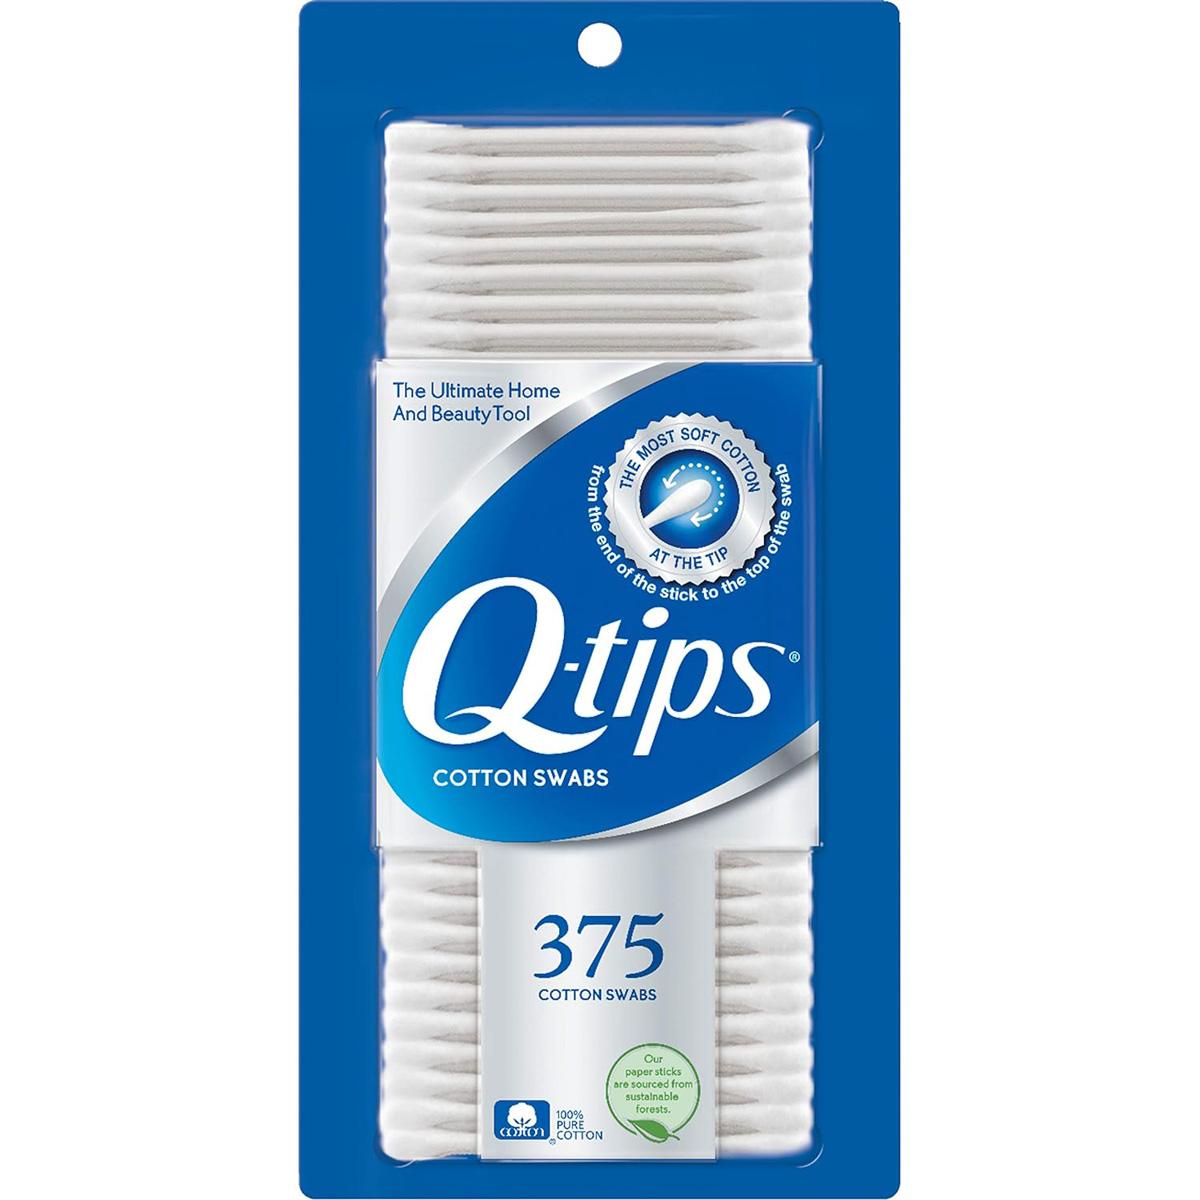 Q-tips Cotton Swabs 375 Pack for $2.88